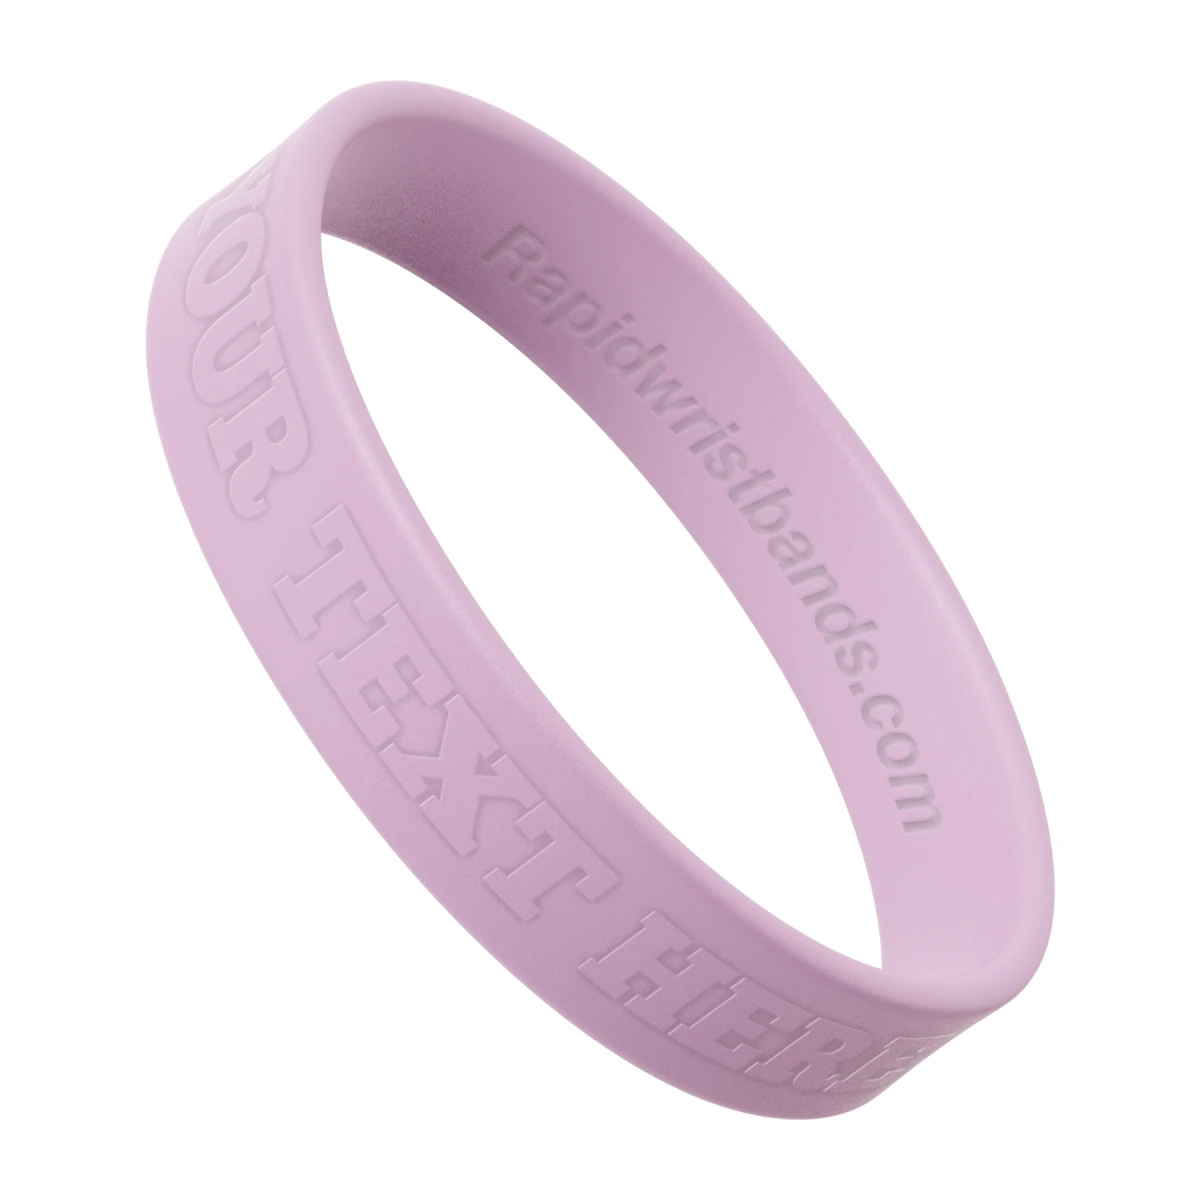 Light Pink Wristband With Your Text Here Embossed